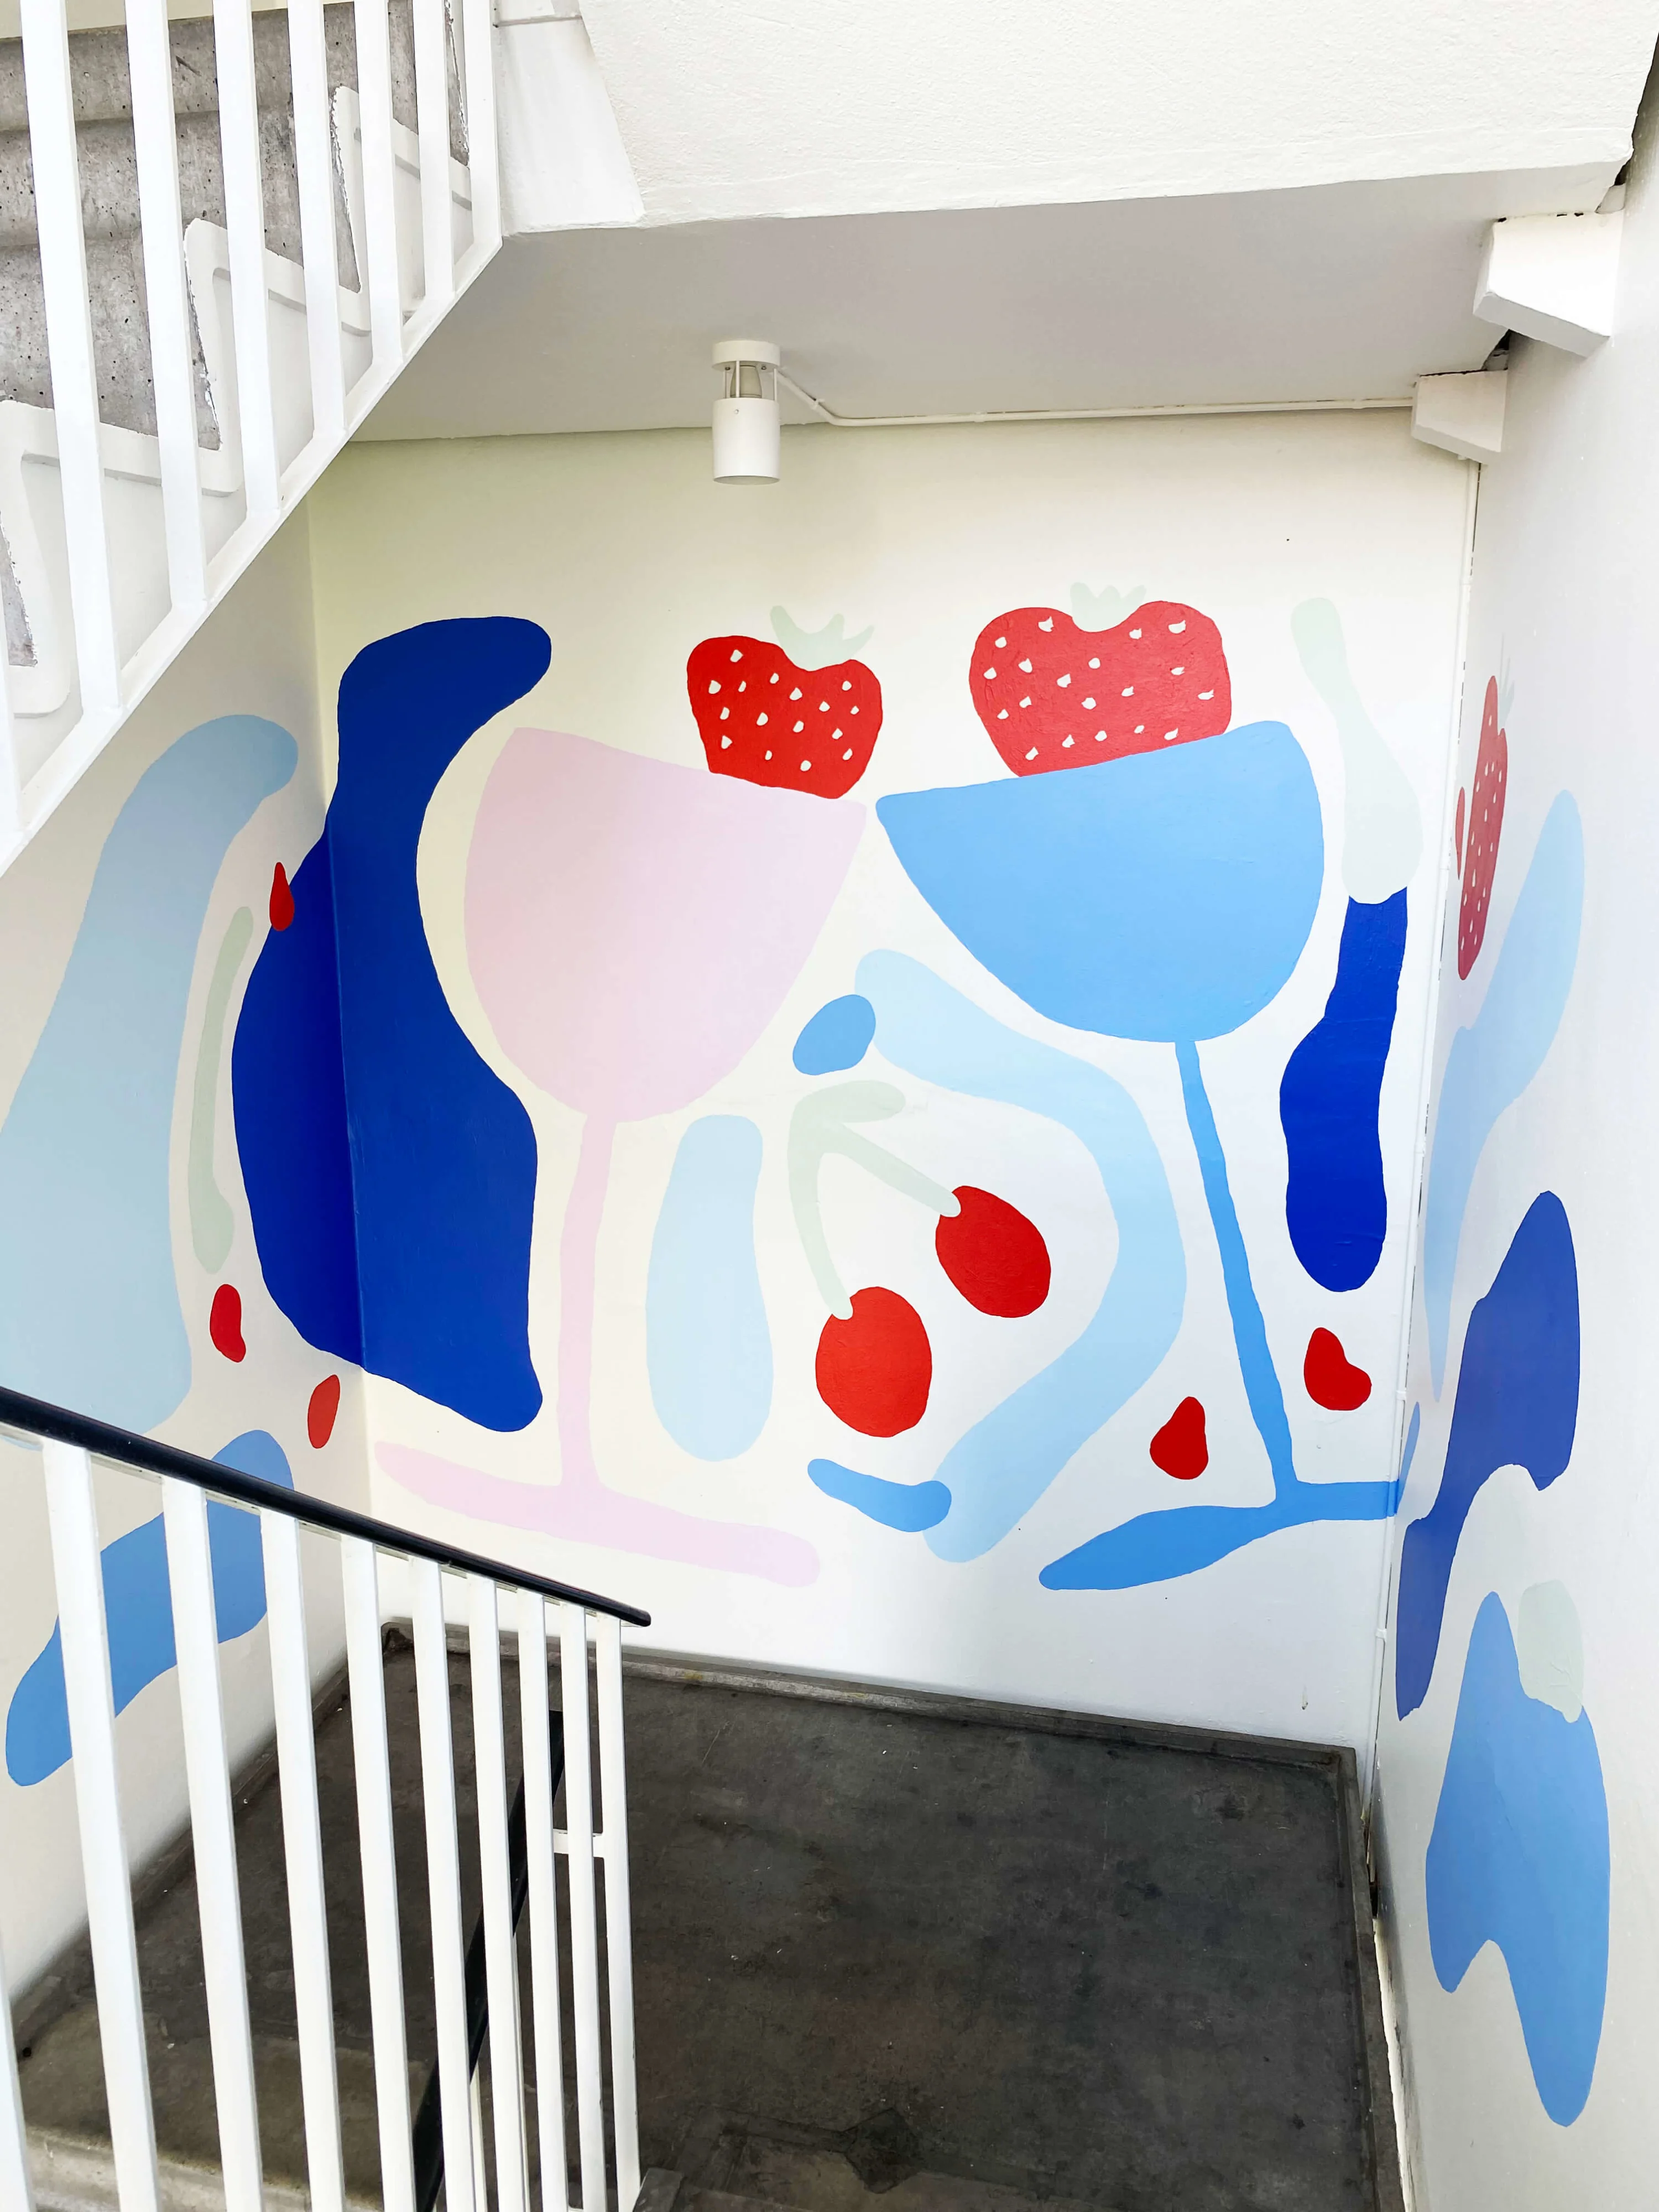 One of the murals in the Danish highrise